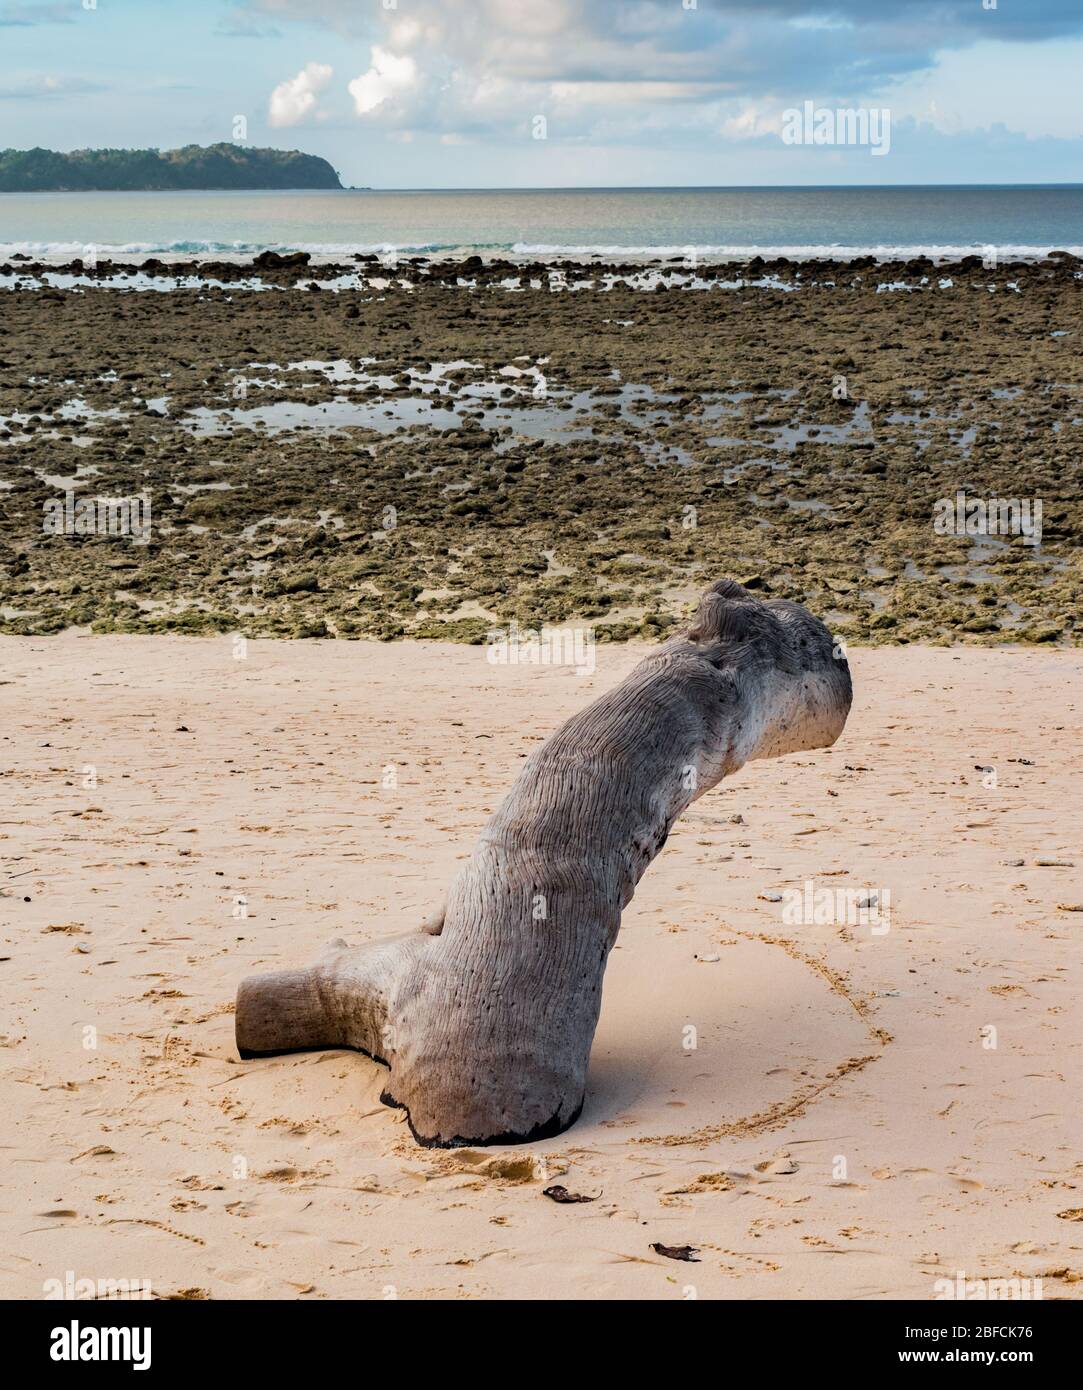 Photo of beach during low tide with dead corals on shore and wooden log of fallen tree, buried half into beach sand, making it a perfect spot to sit Stock Photo